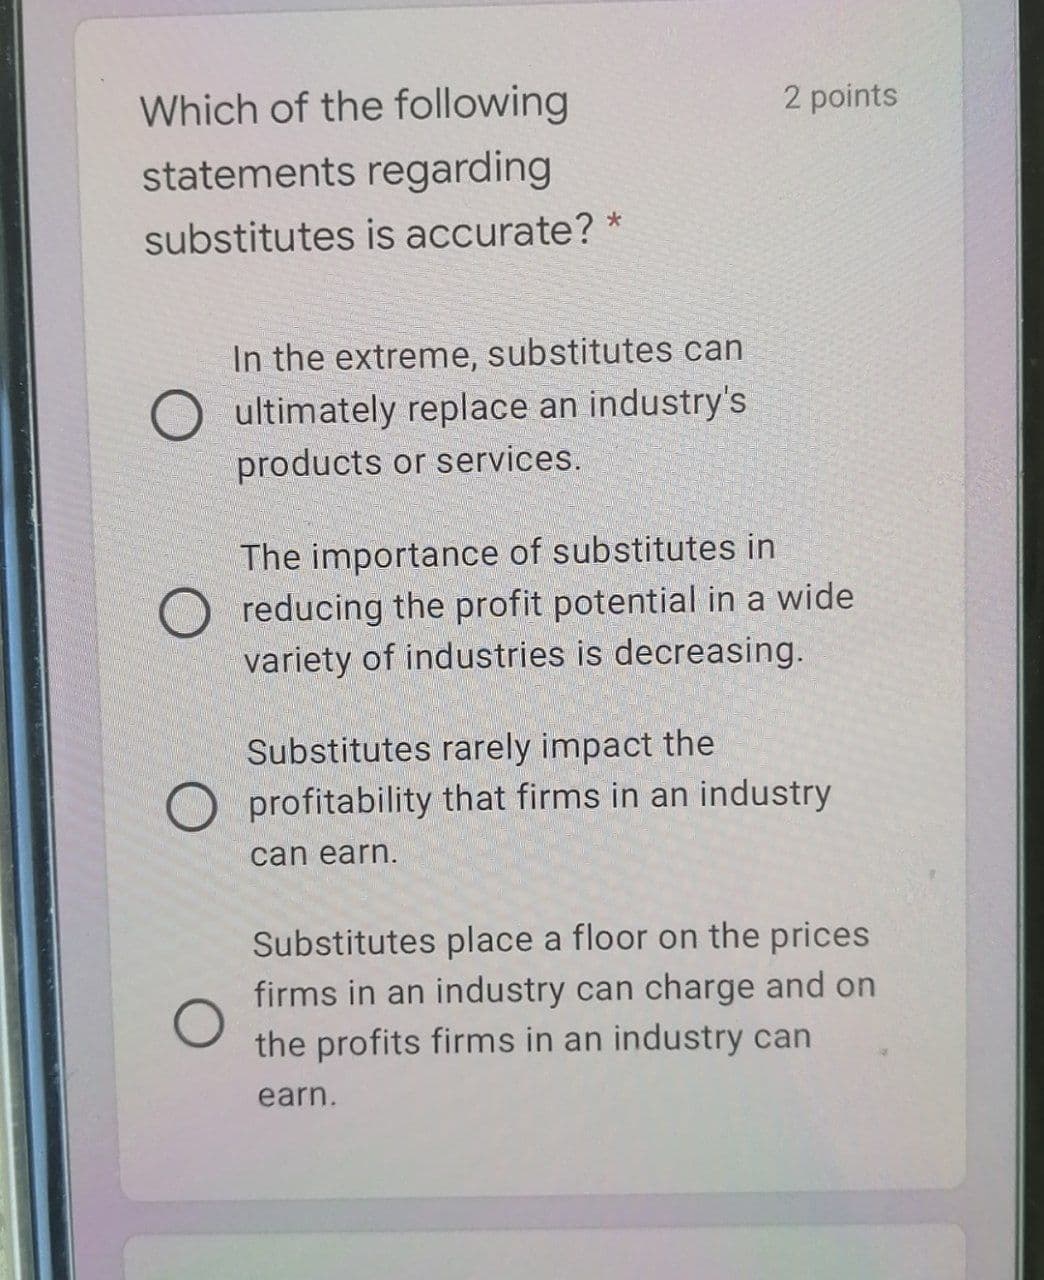 Which of the following
2 points
statements regarding
substitutes is accurate? *
In the extreme, substitutes can
ultimately replace an industry's
products or services.
The importance of substitutes in
O reducing the profit potential in a wide
variety of industries is decreasing.
Substitutes rarely impact the
O profitability that firms in an industry
can earn.
Substitutes place a floor on the prices
firms in an industry can charge and on
the profits firms in an industry can
earn.
